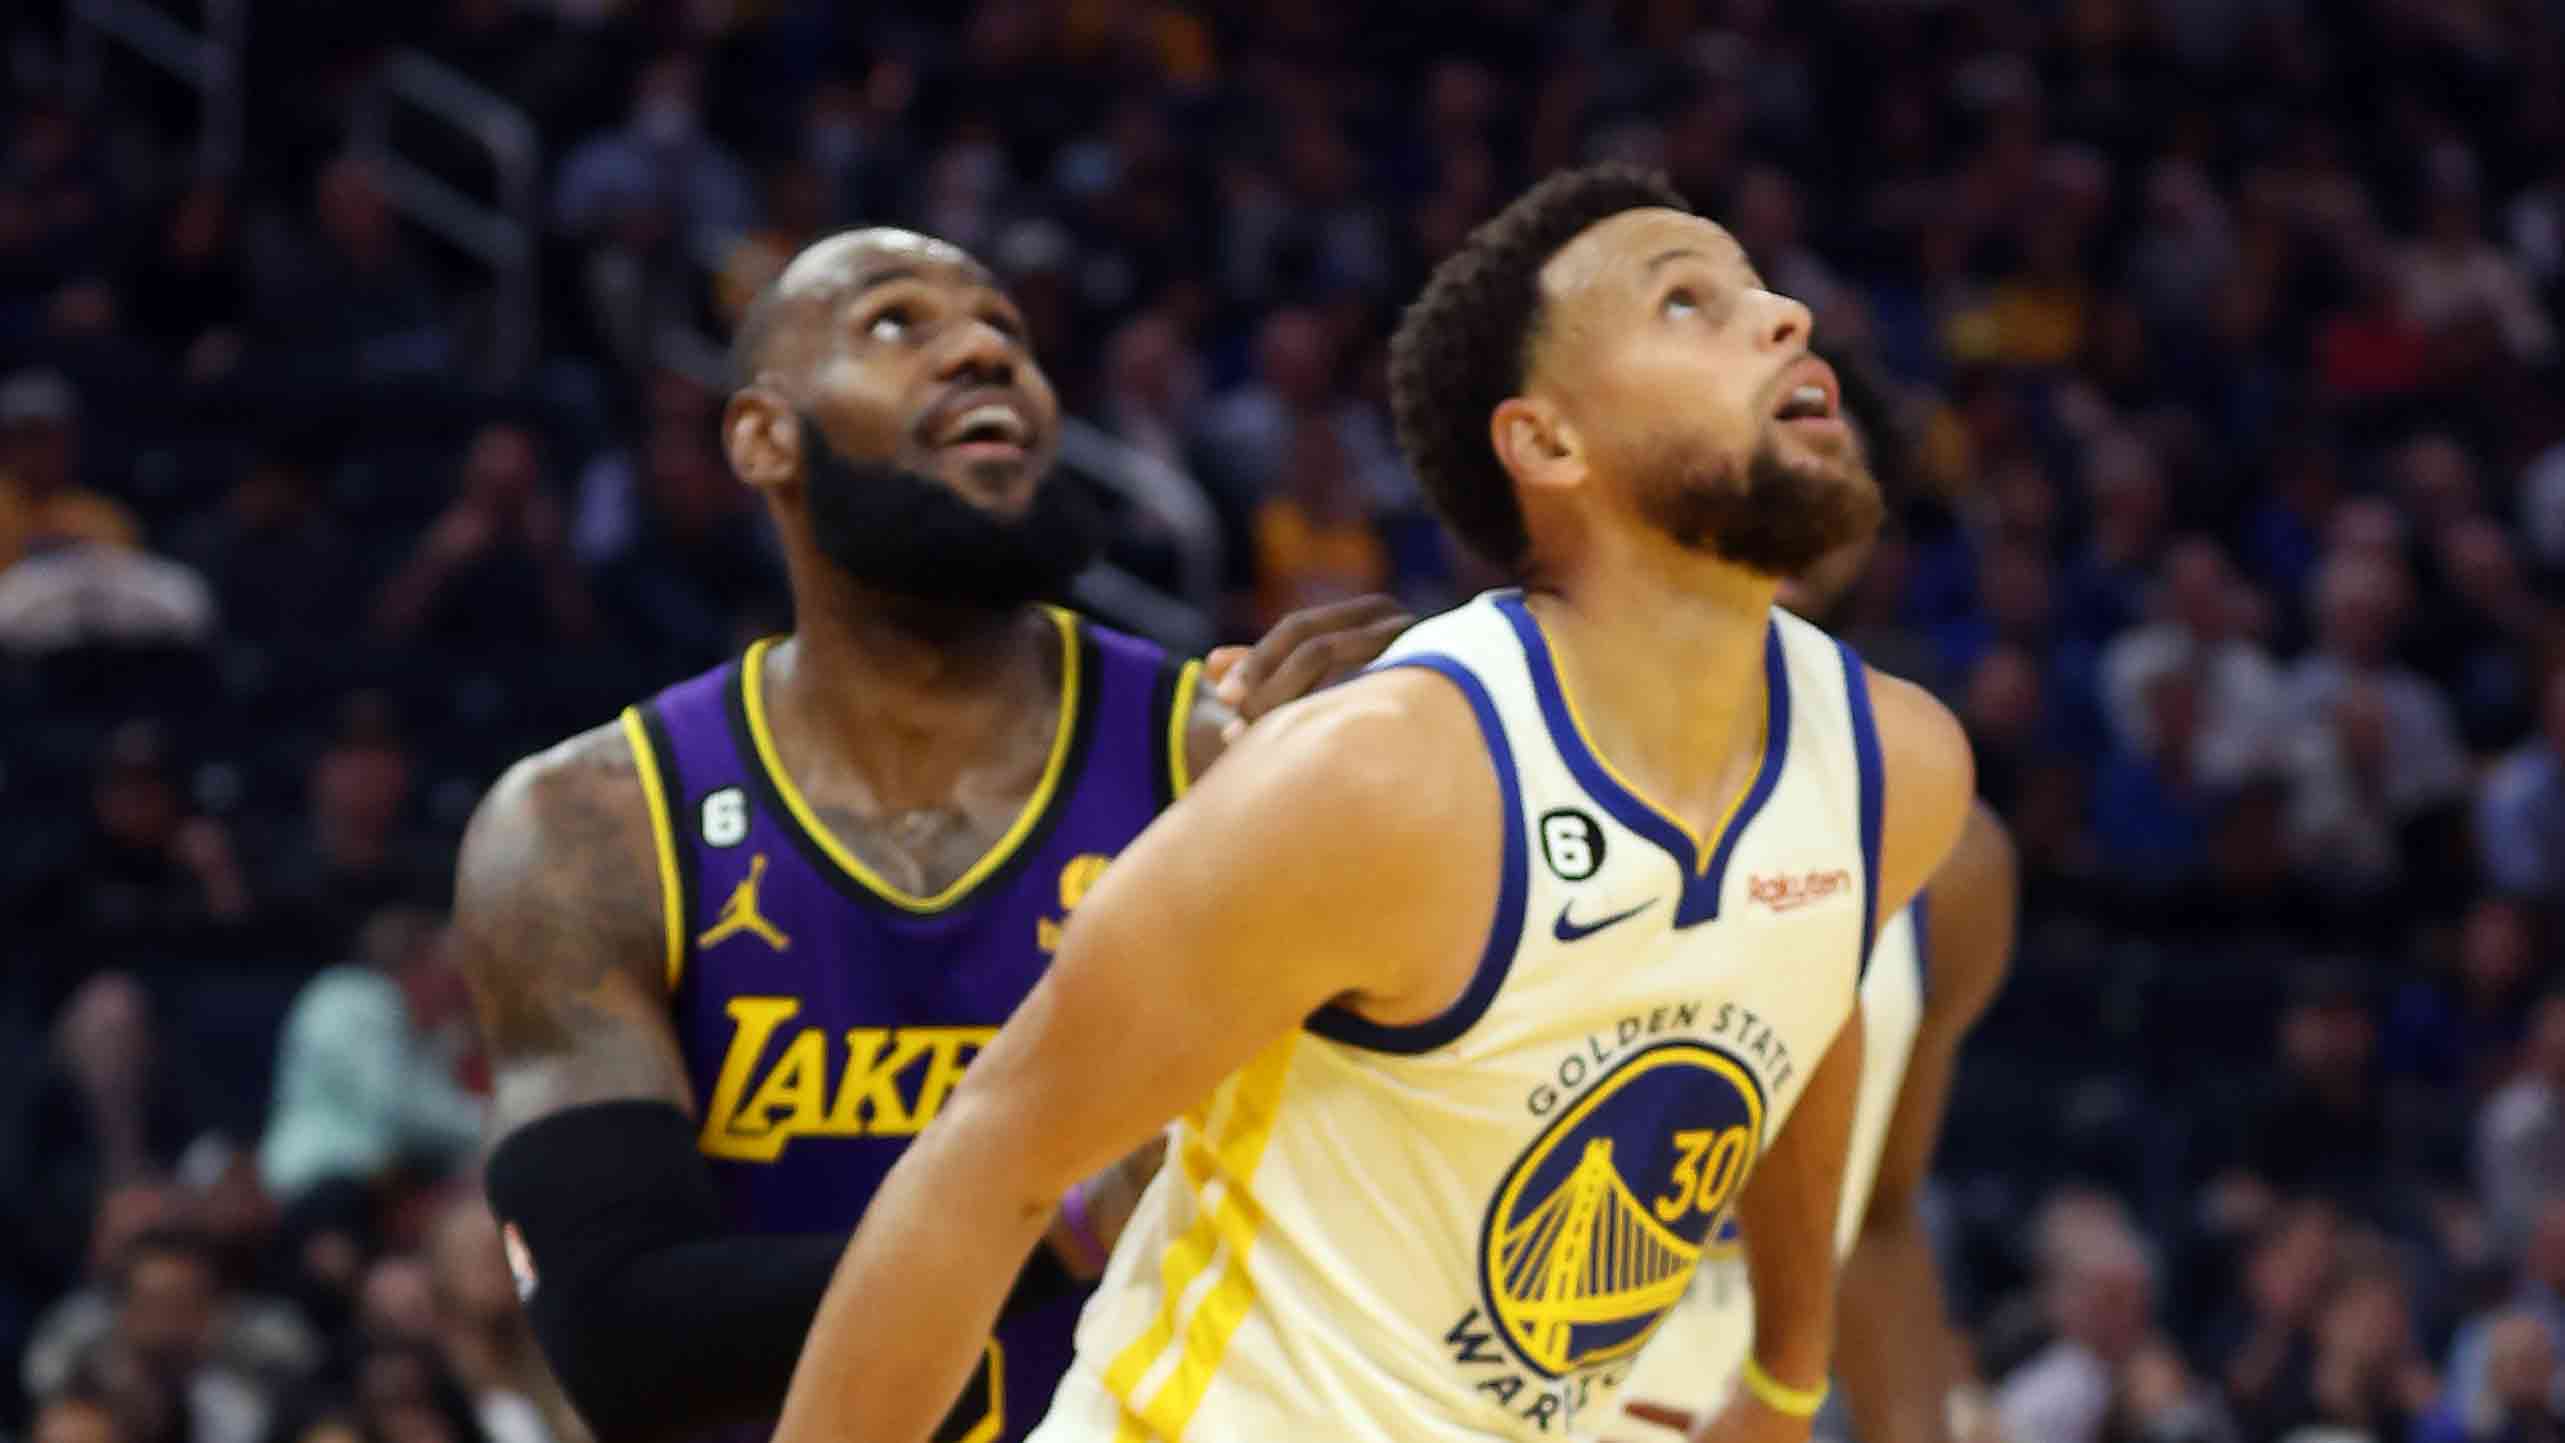 How to Watch Game 1 of Warriors-Lakers NBA Playoff Series